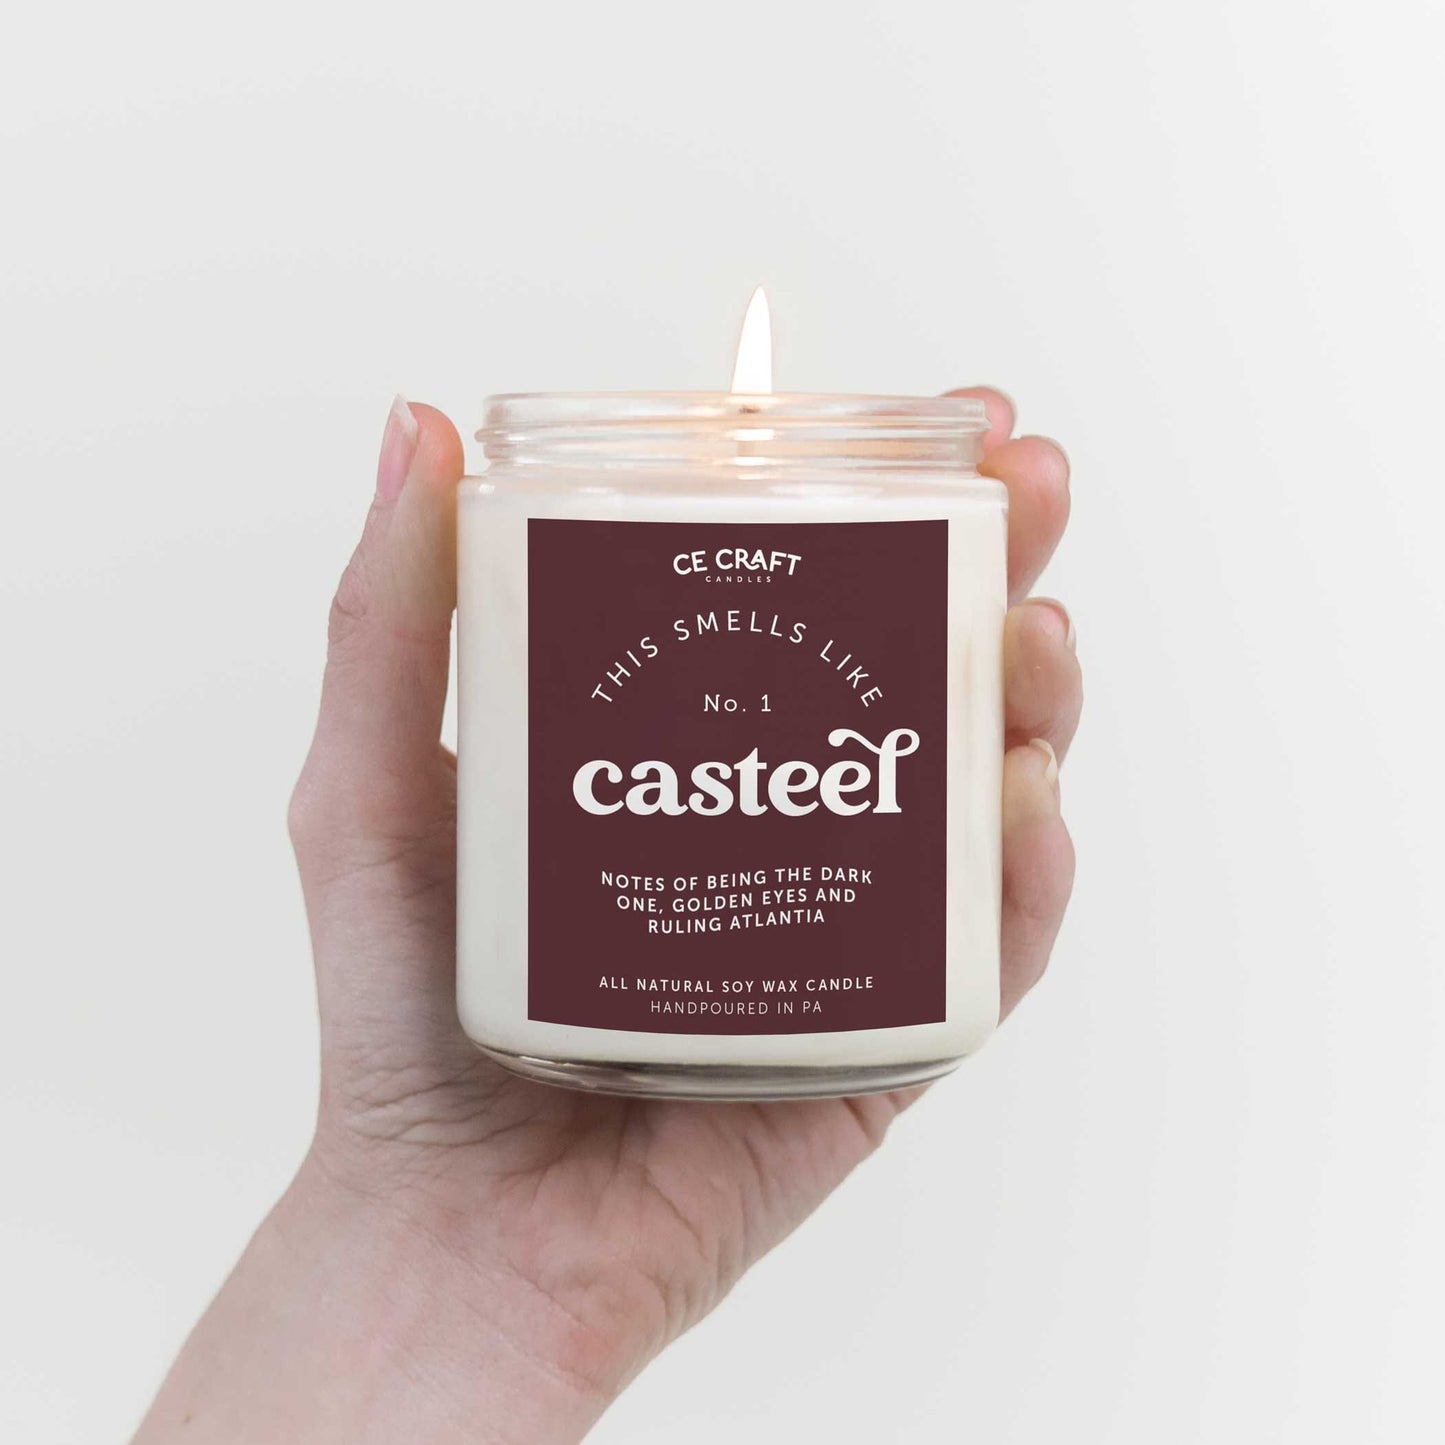 This Smells Like Casteel Candle CE Craft Standard 